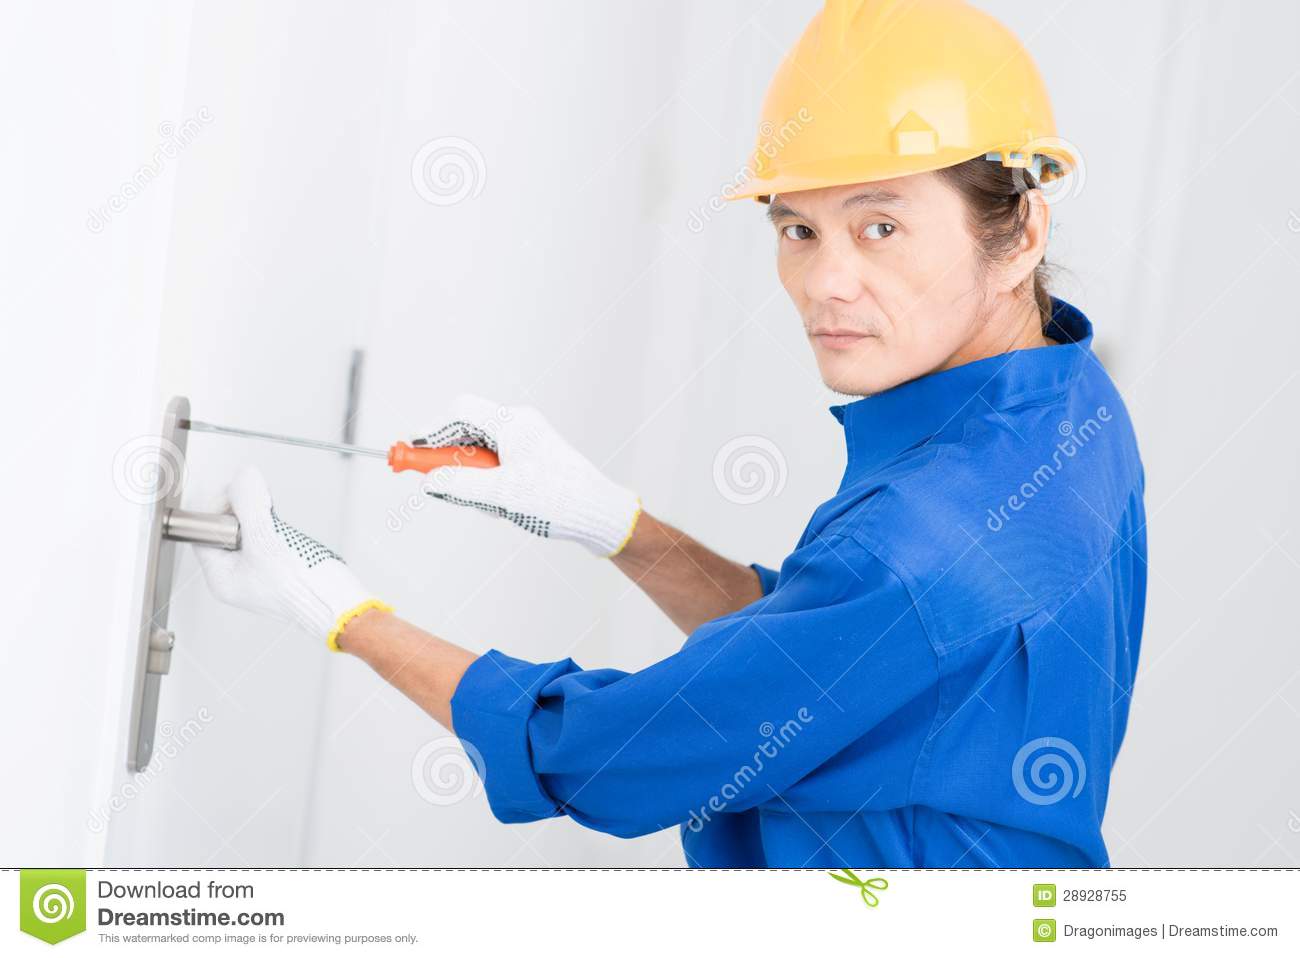 Contractor Royalty Free Stock Photo   Image  28928755